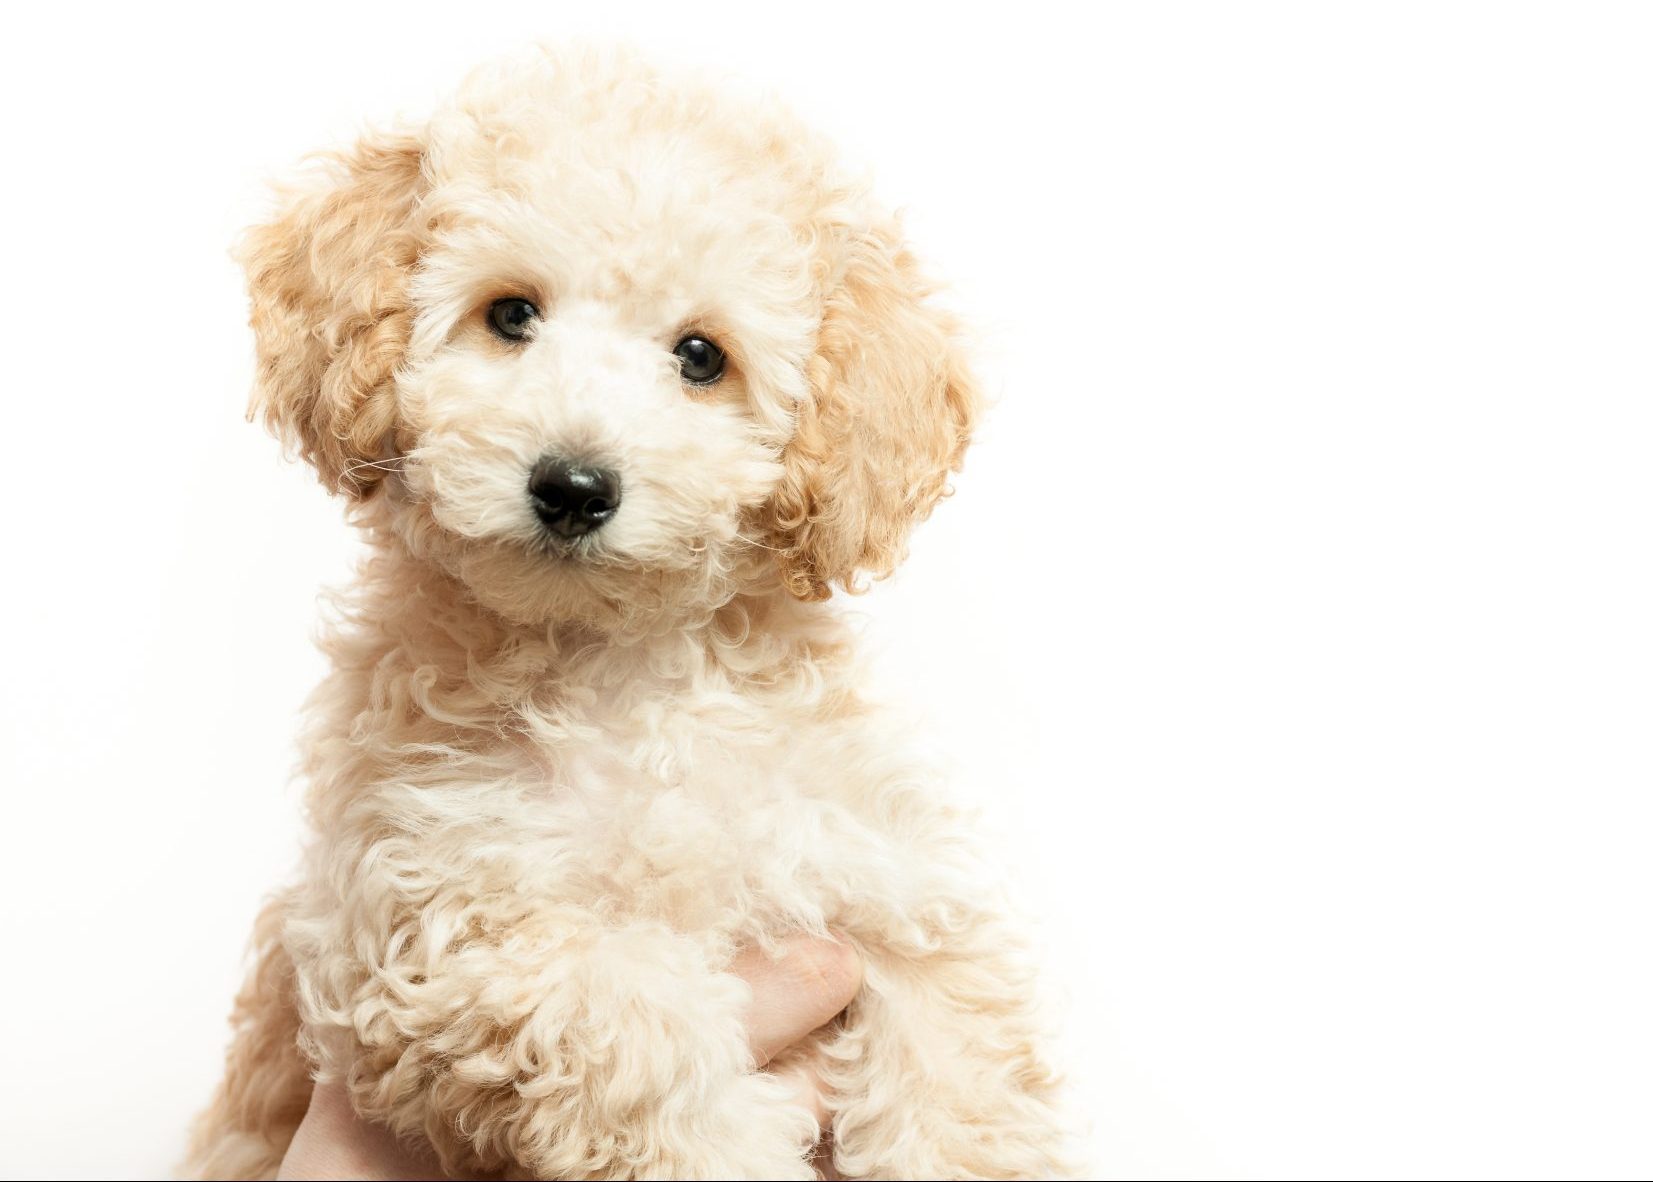 Preparing Your Home and Family for a New Puppy 